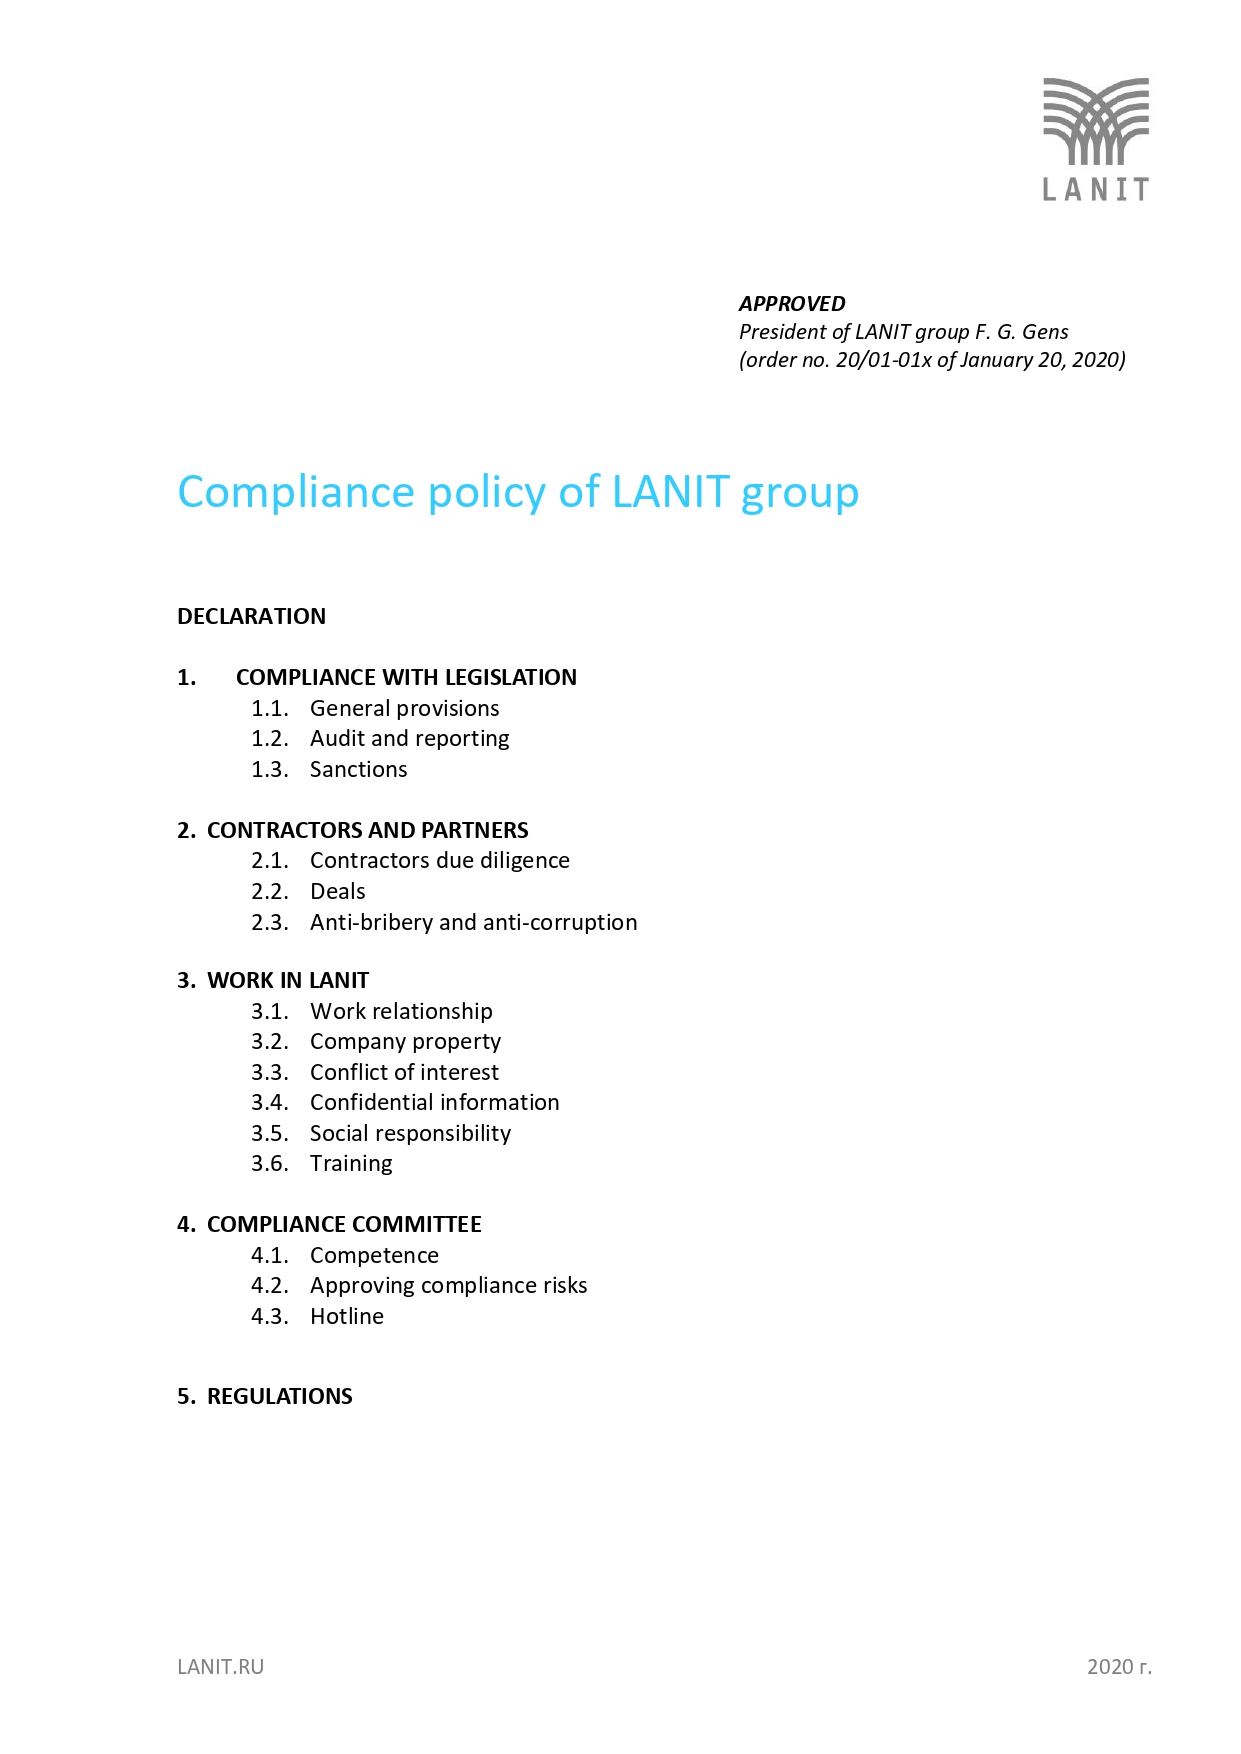 COMPLIANCE POLICY OF GROUP LANIT